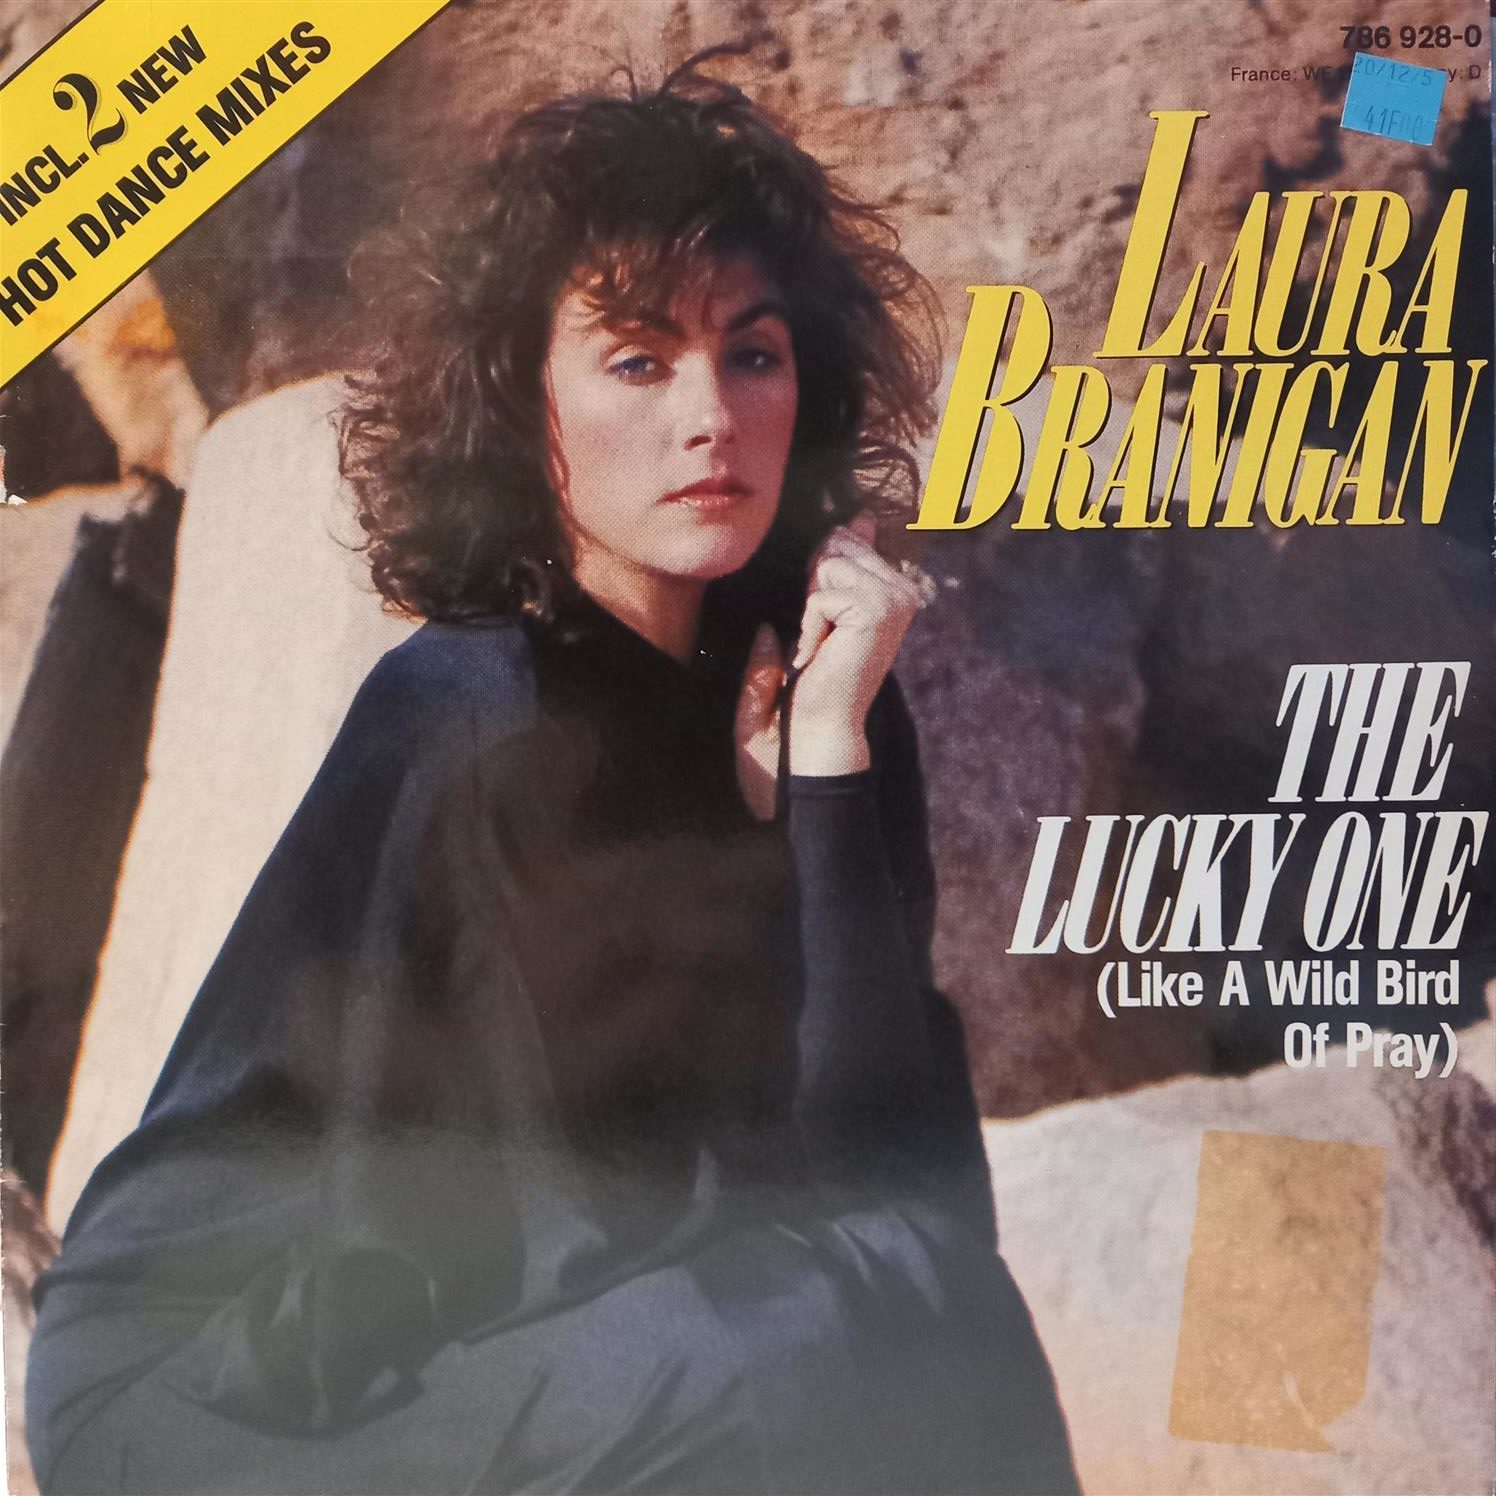 LAURA BRANIGAN – THE LUCKY ONE ON